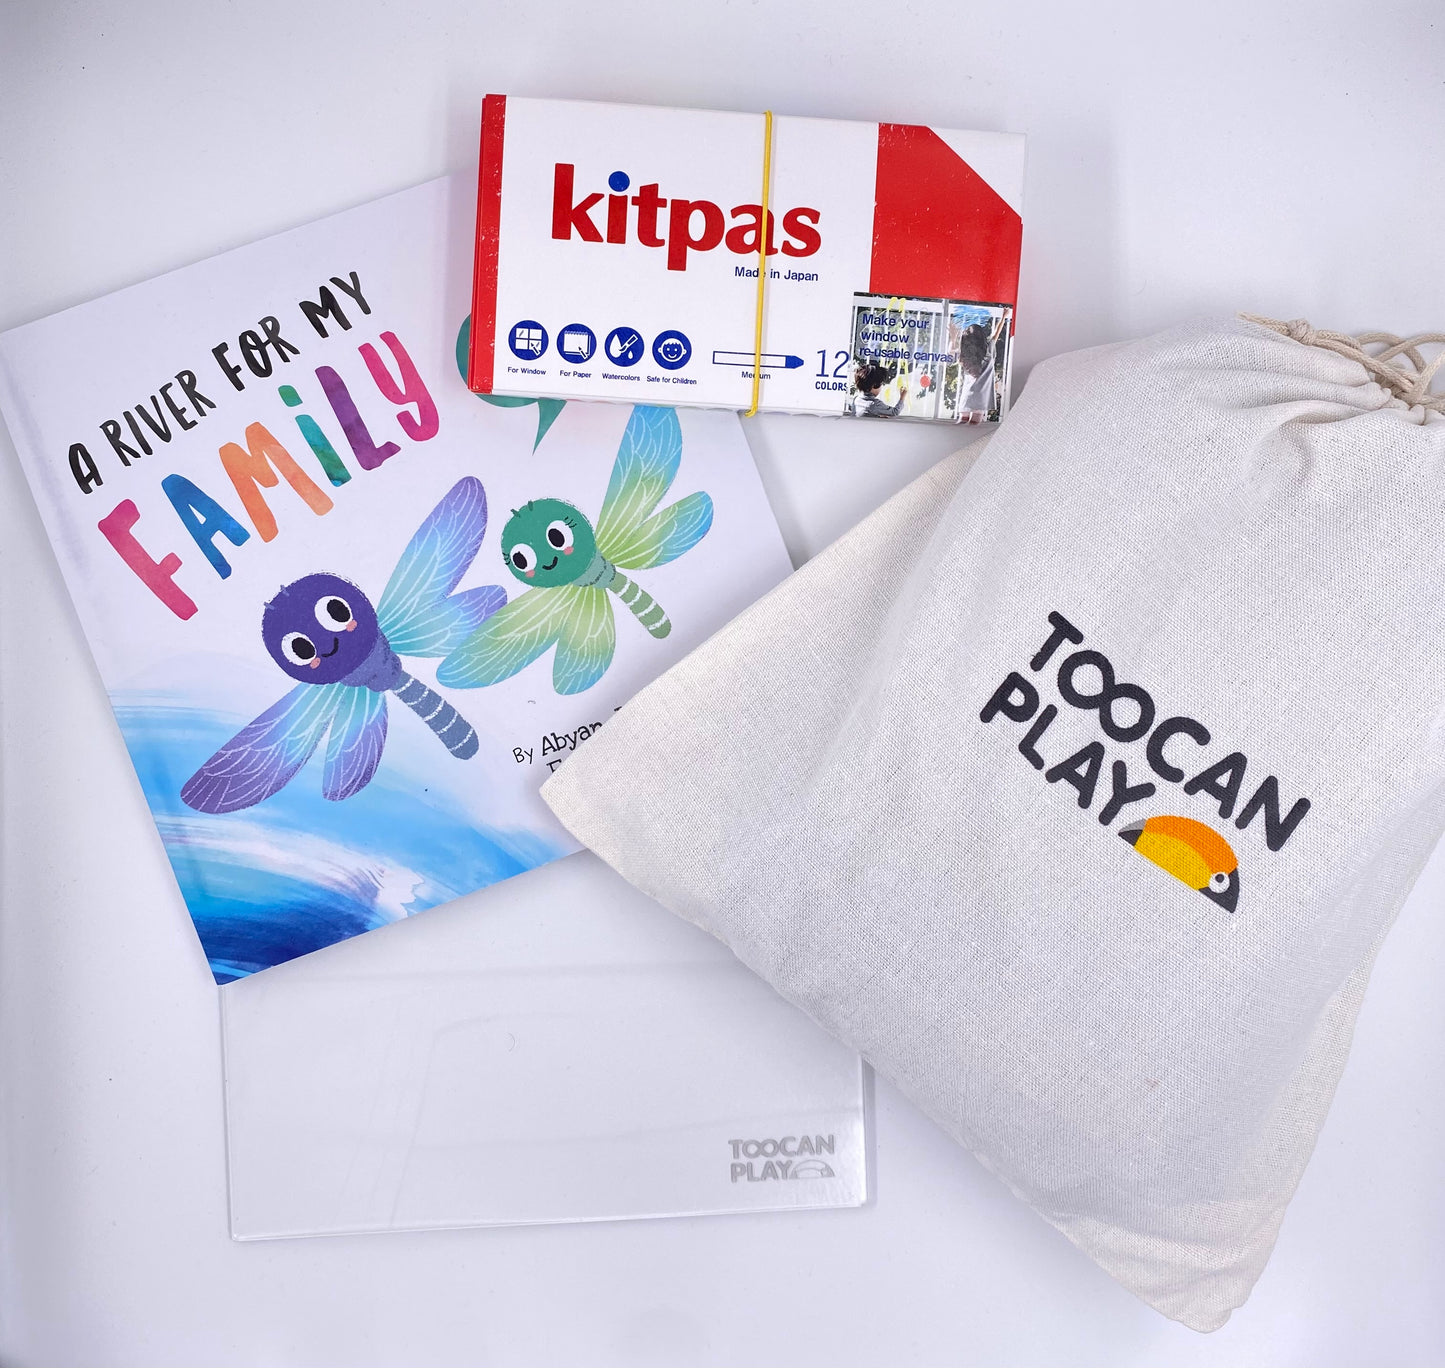 A River For My Family + KITPAS Bundle